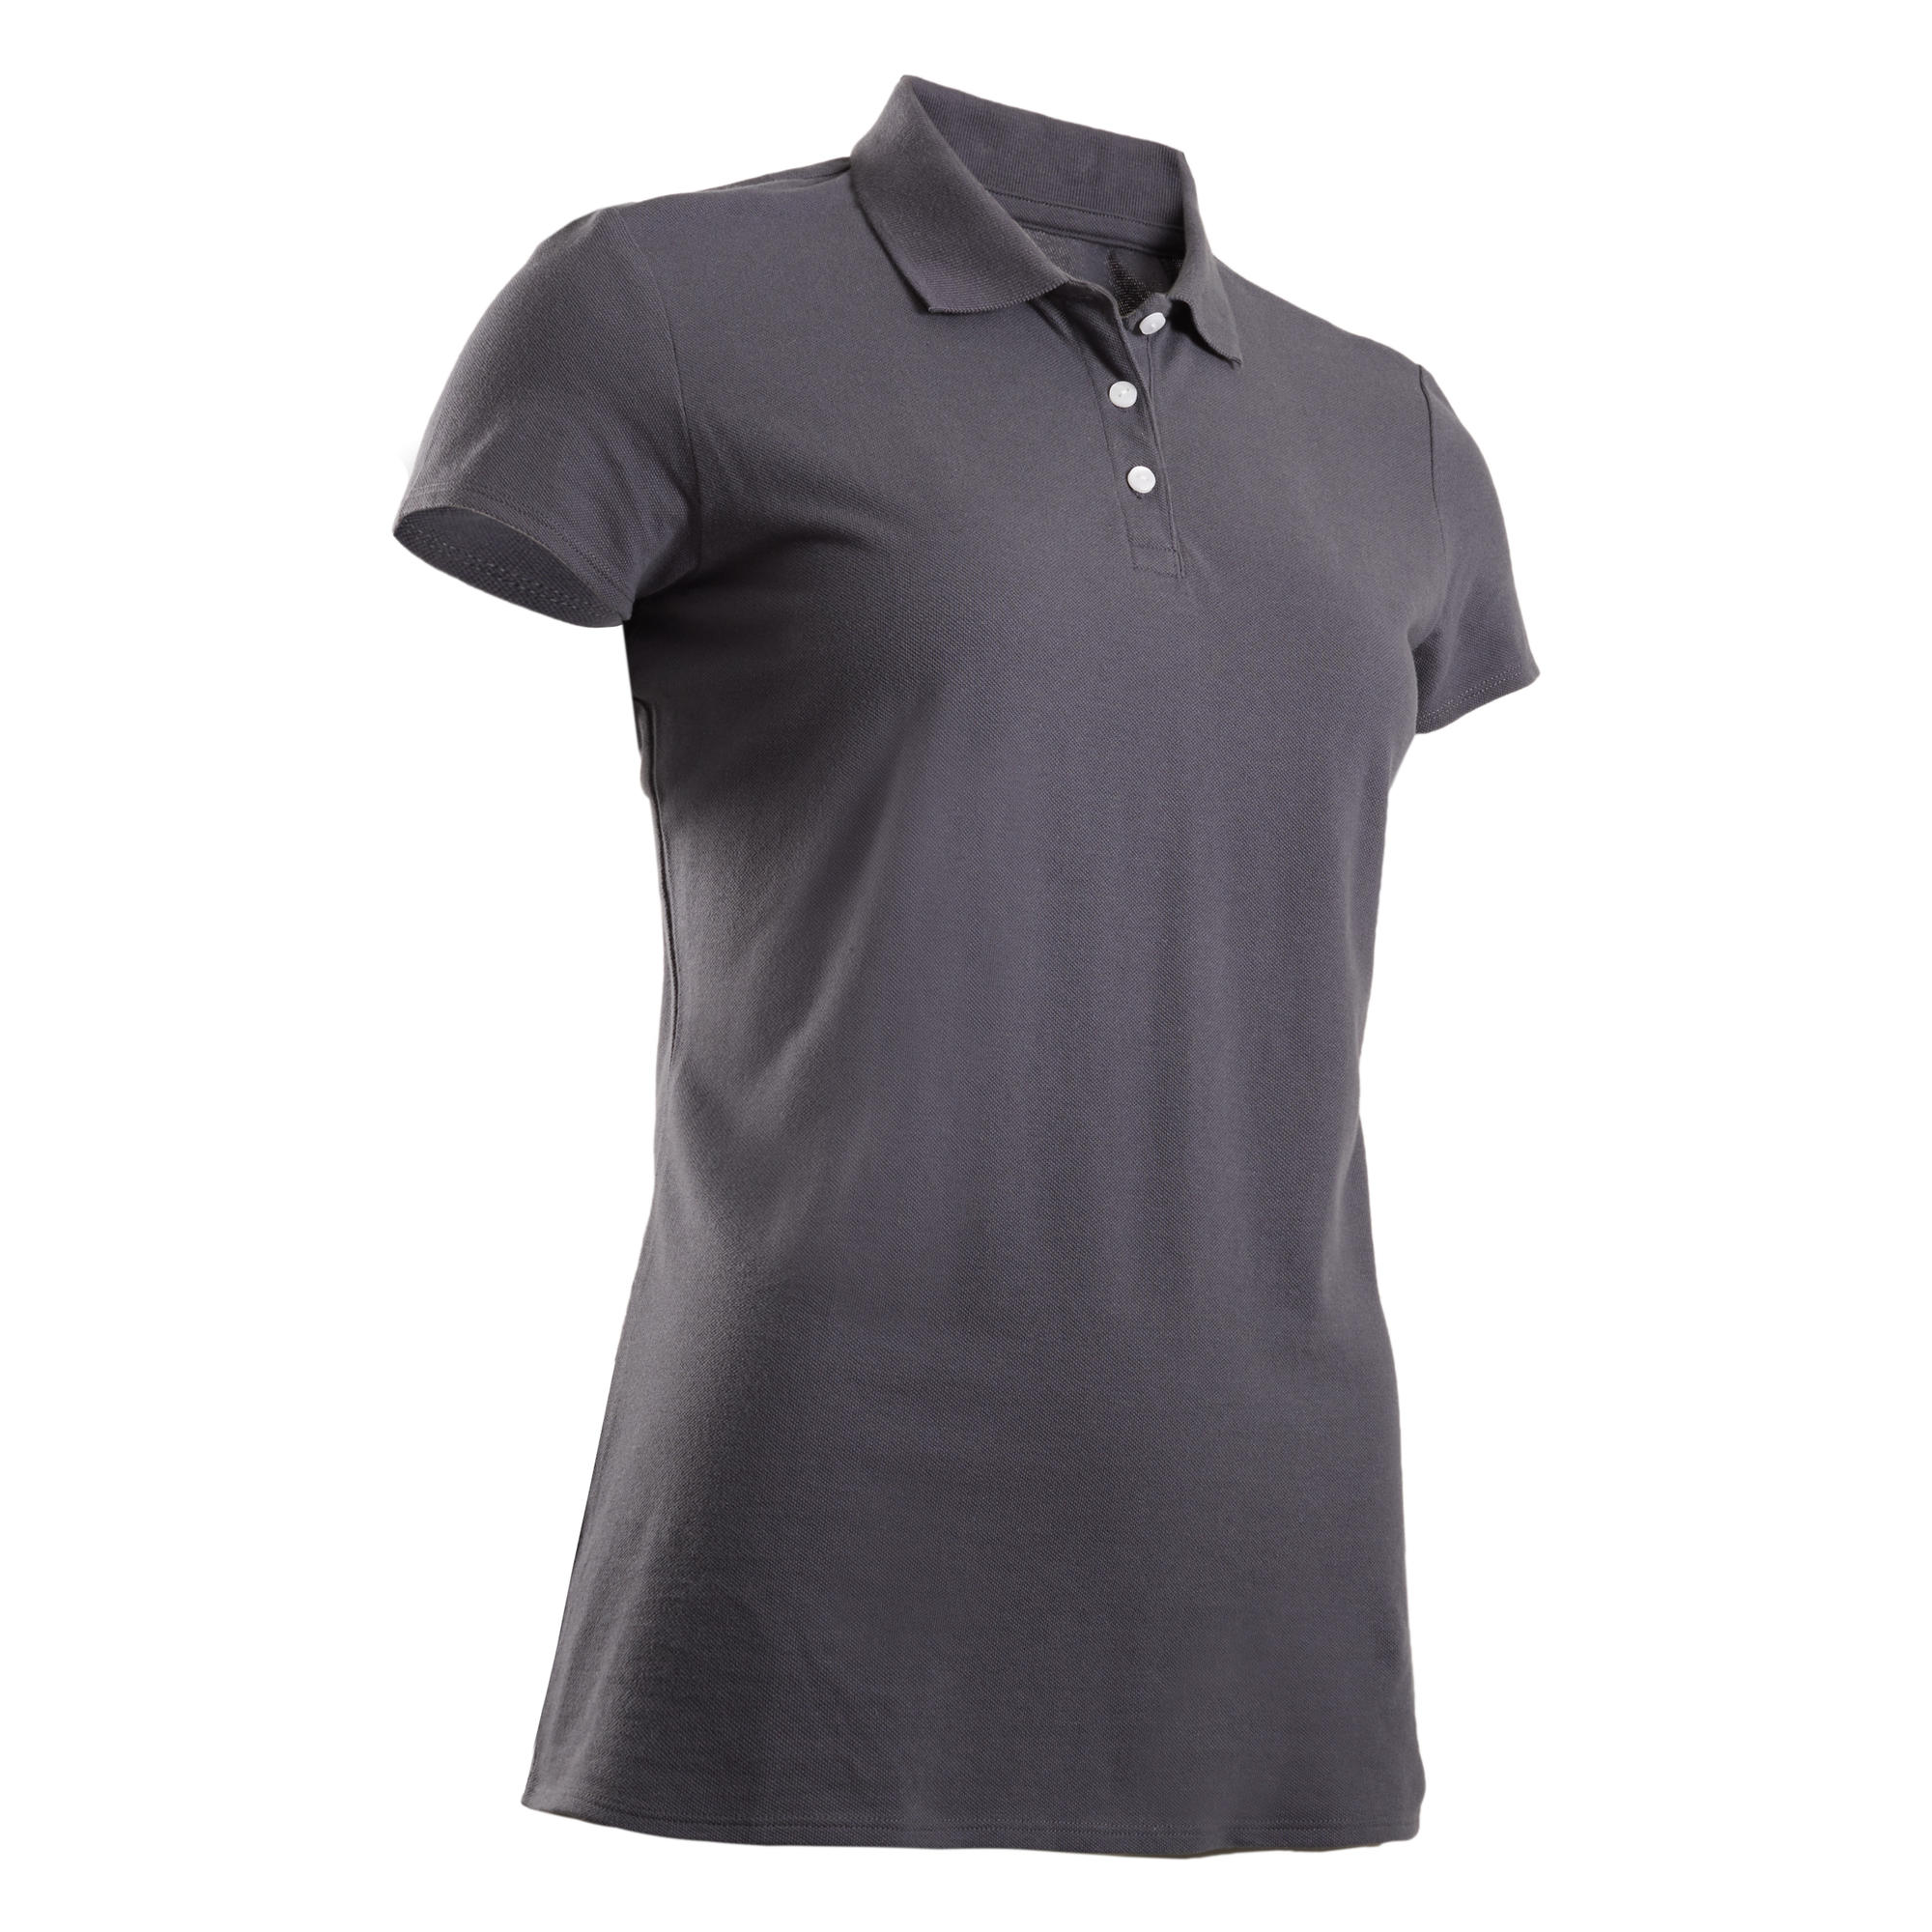 women's fitted golf shirts